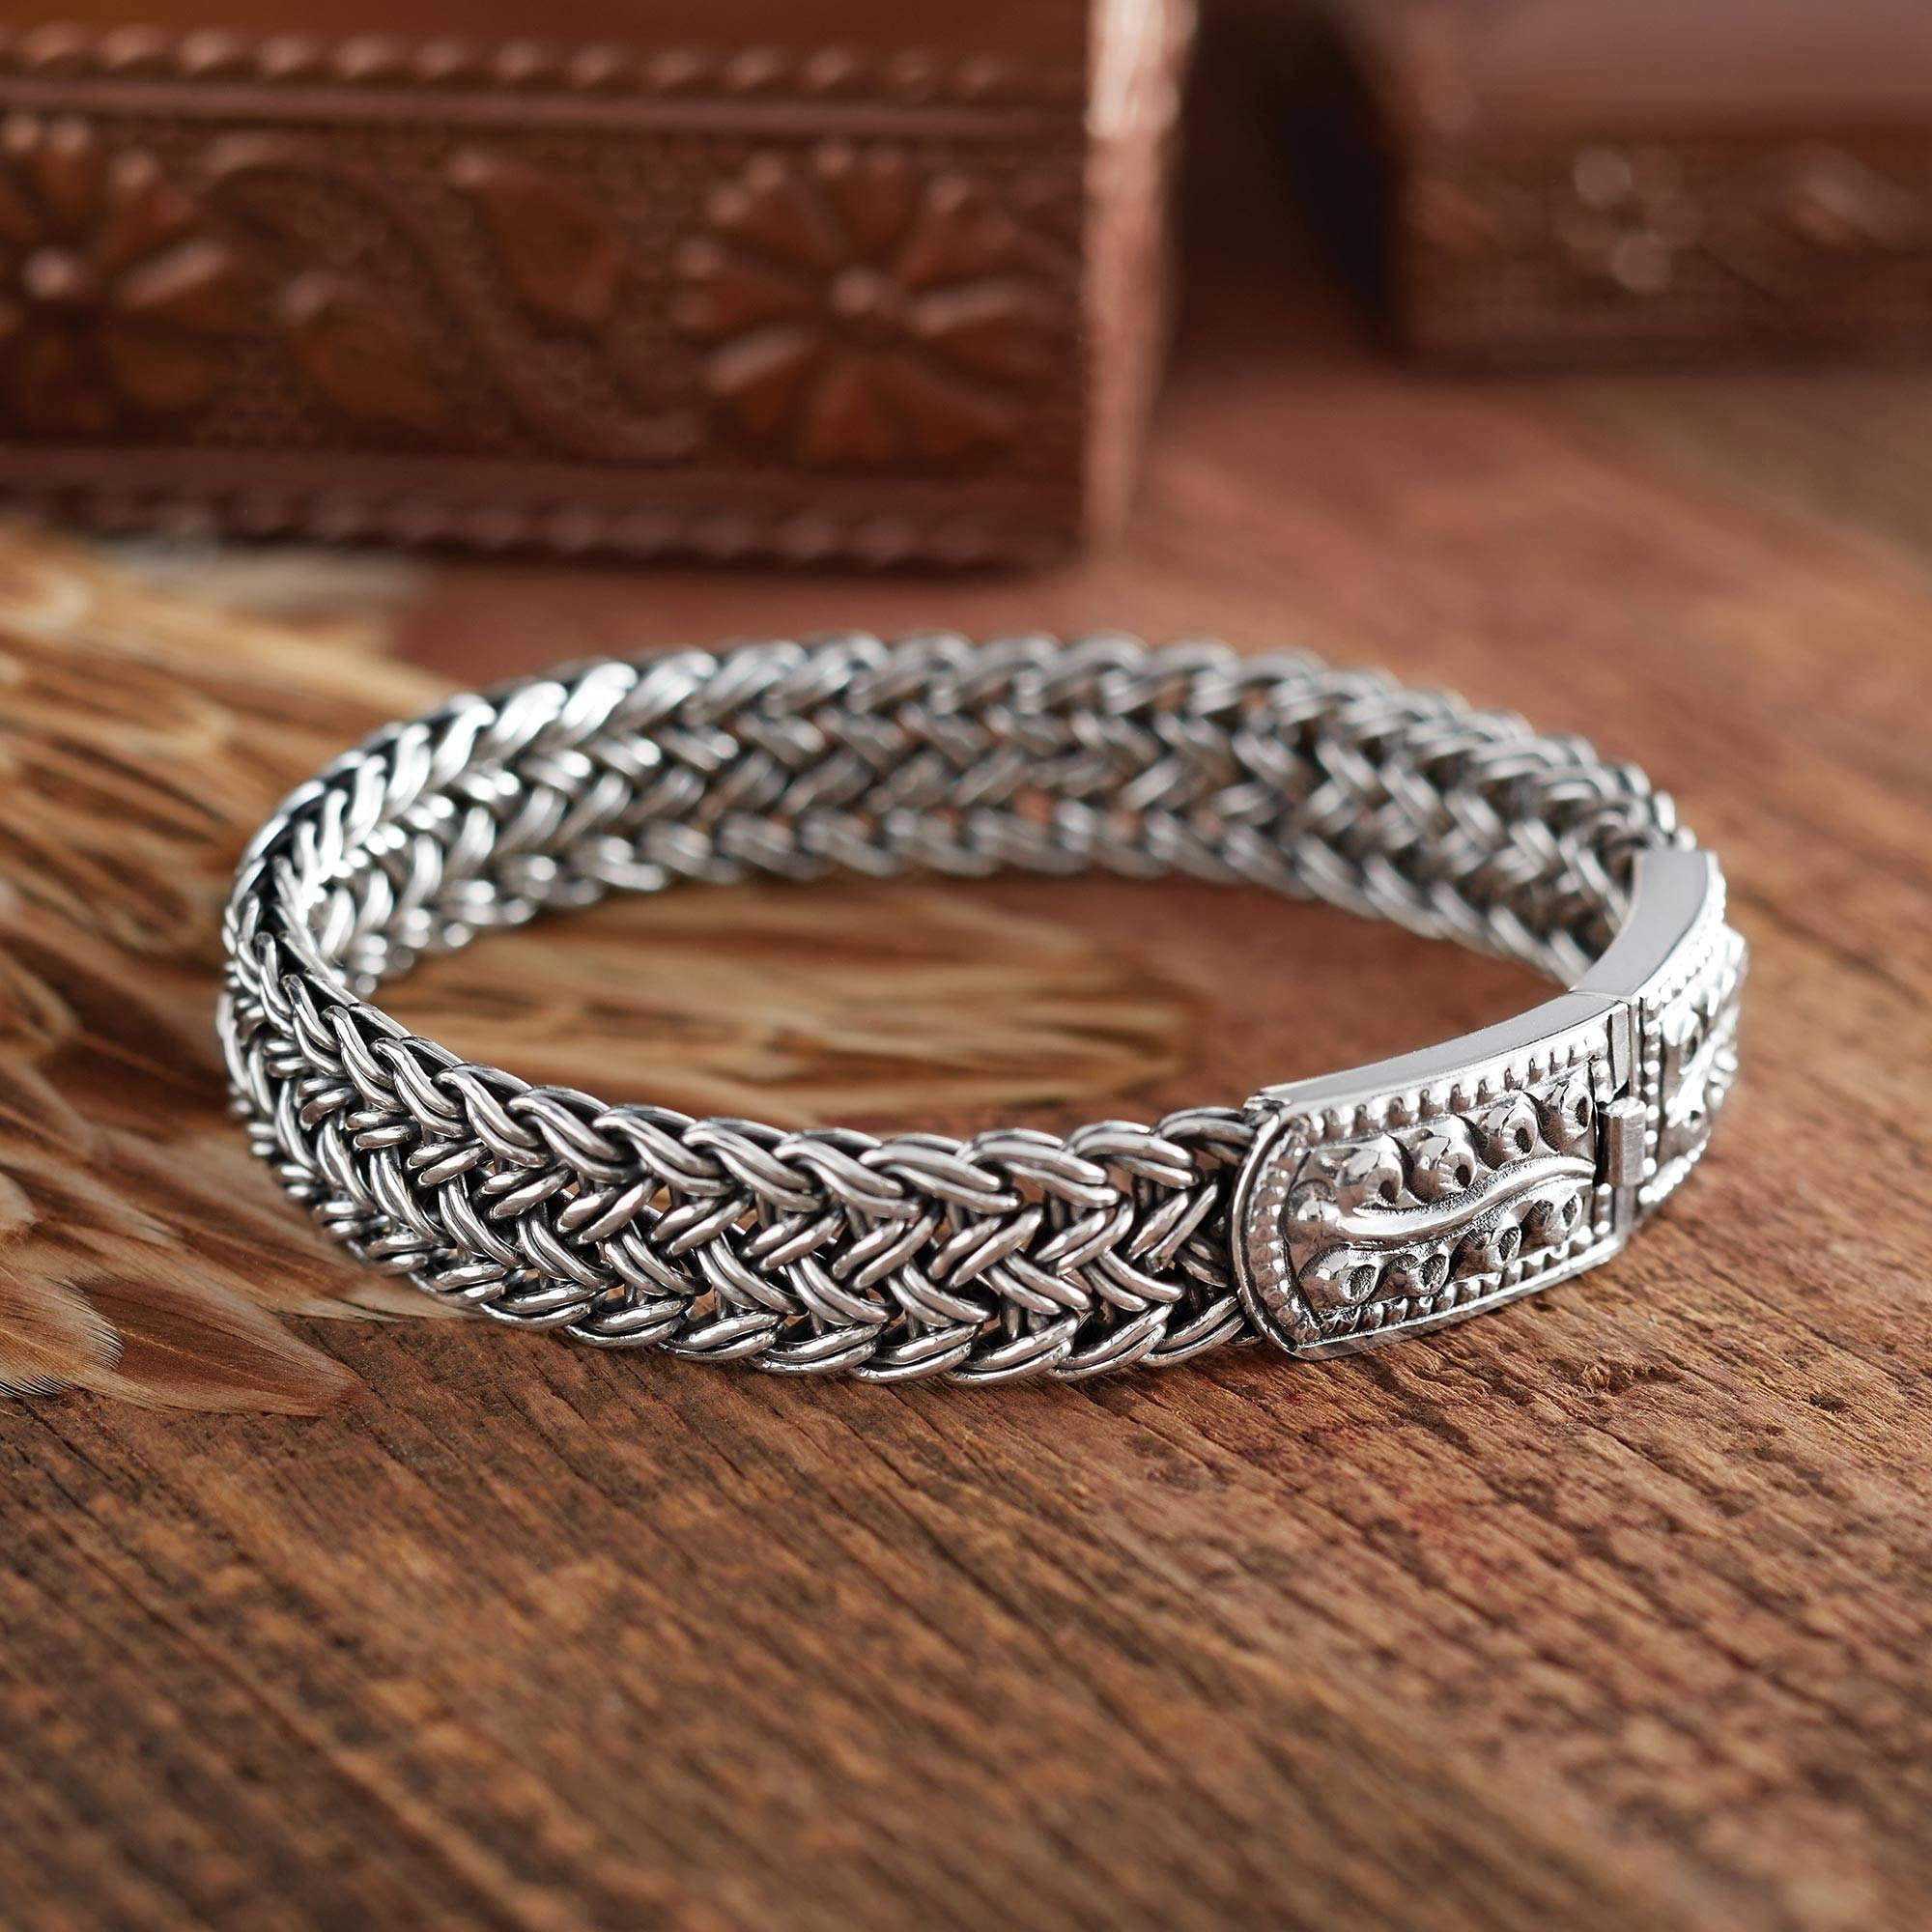 Amazon.com: NOVICA Handmade .925 Sterling Silver Braided Bracelet Chain No  Stone Indonesia [7.5 in L x 0.3 in W] 'Links of Power': Chain Bracelets:  Clothing, Shoes & Jewelry